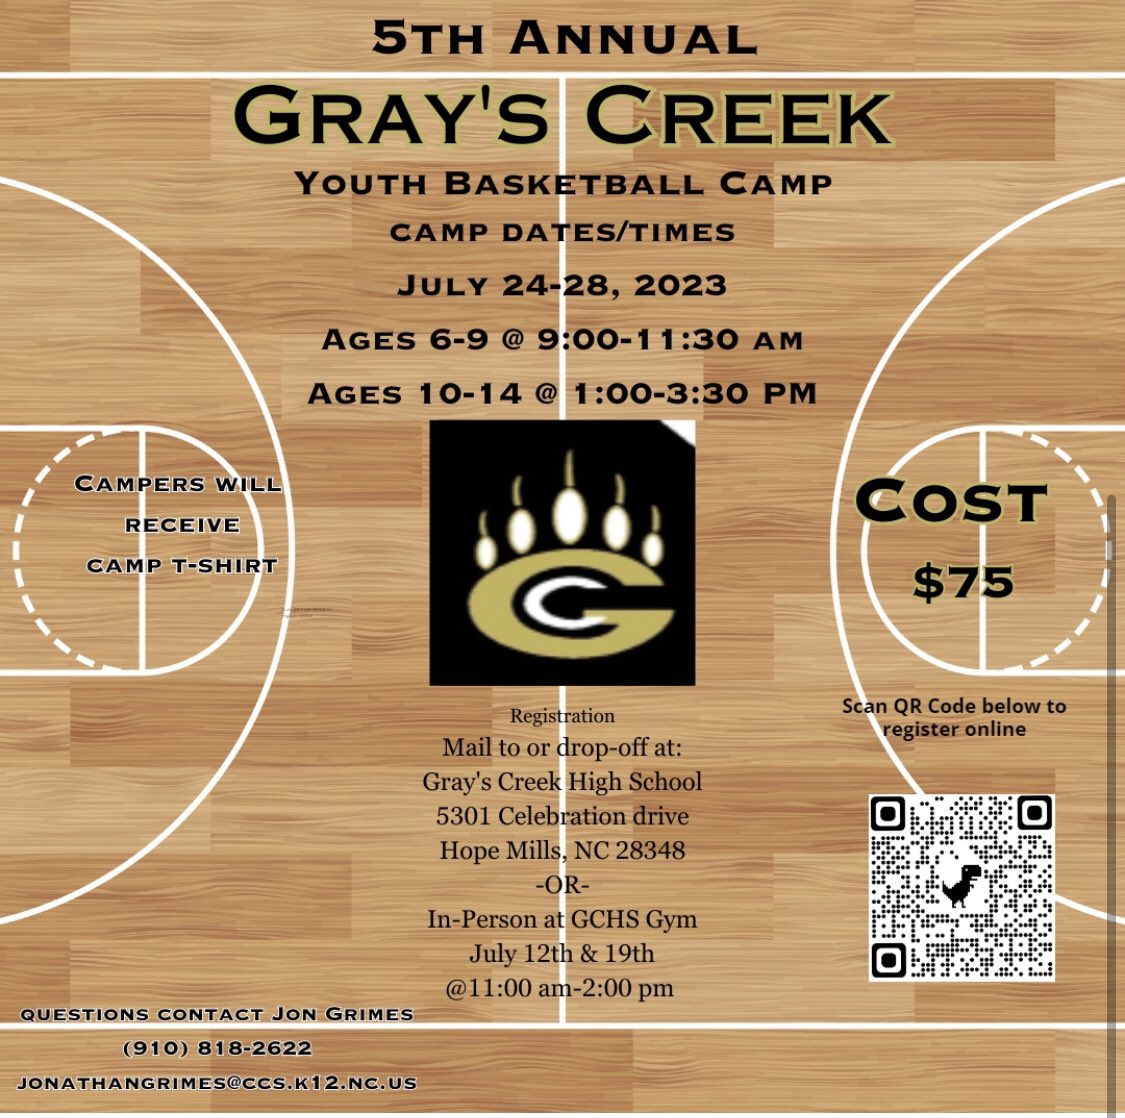 I will be back at Gray's Creek High School tomorrow at 11:00 am until 2:00 pm to register kids for youth basketball 🏀 camp. Registration is open for boys and girls from ages 6-14. Camp starts Monday July 24th. Hope to see you there!!